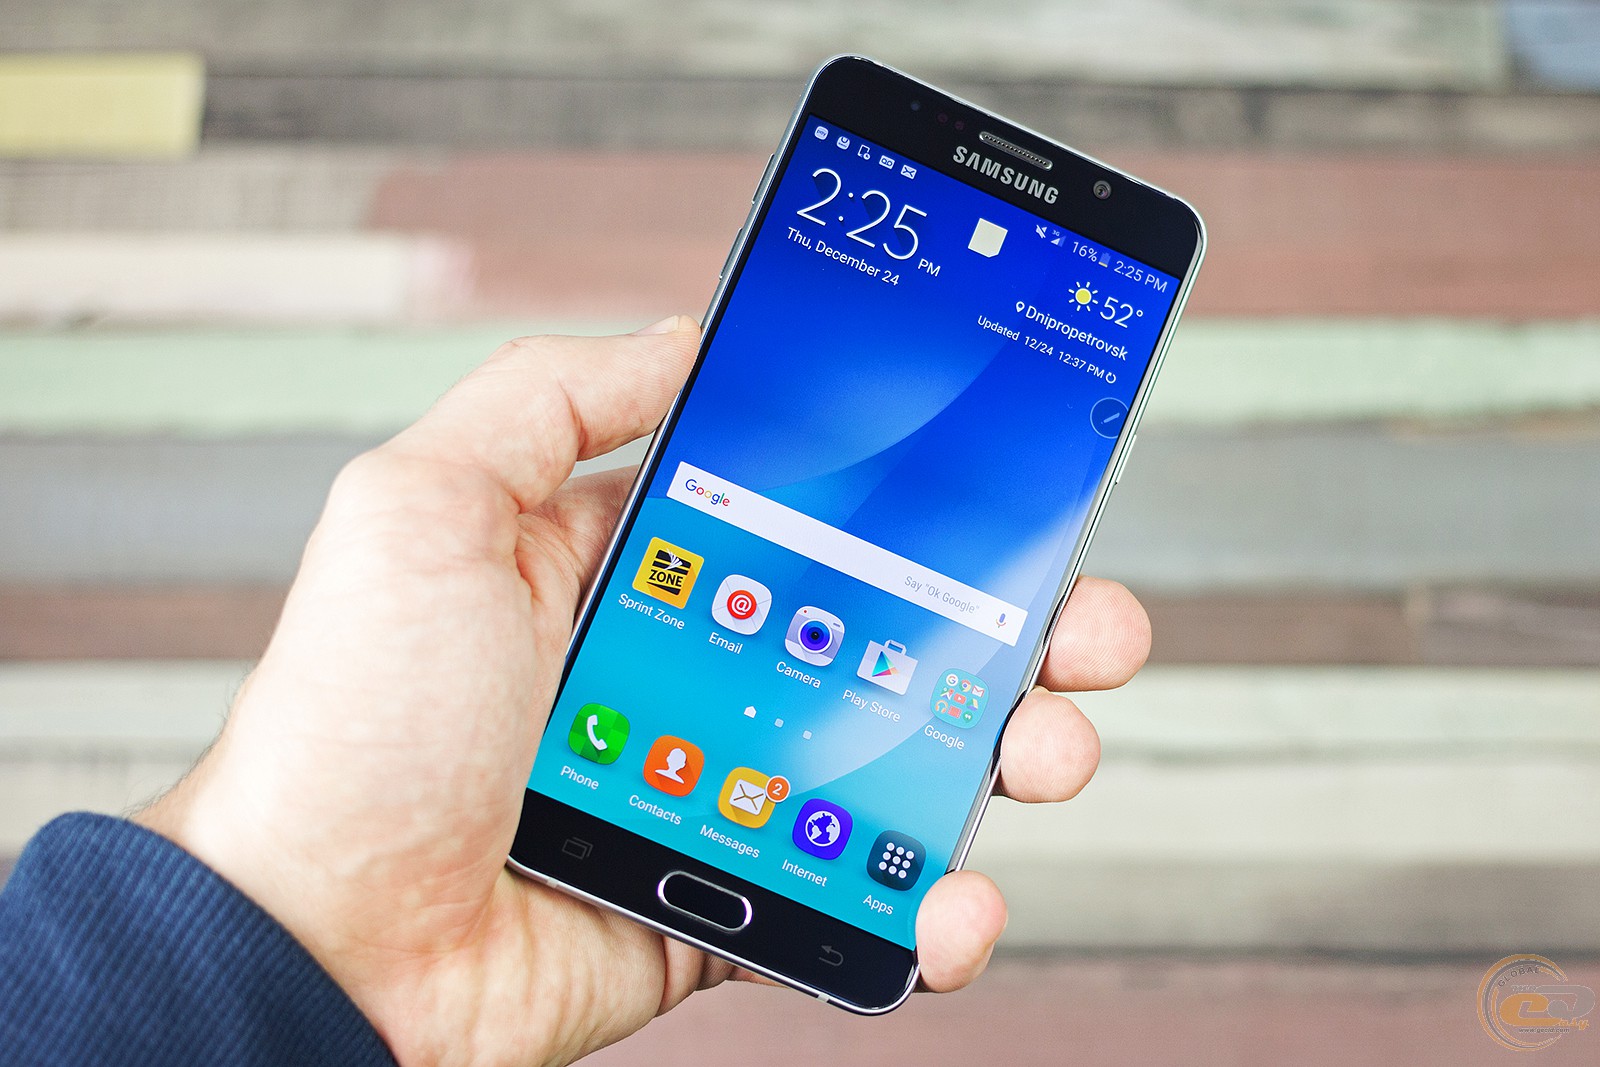 Samsung Galaxy Note5 pictures, official photos